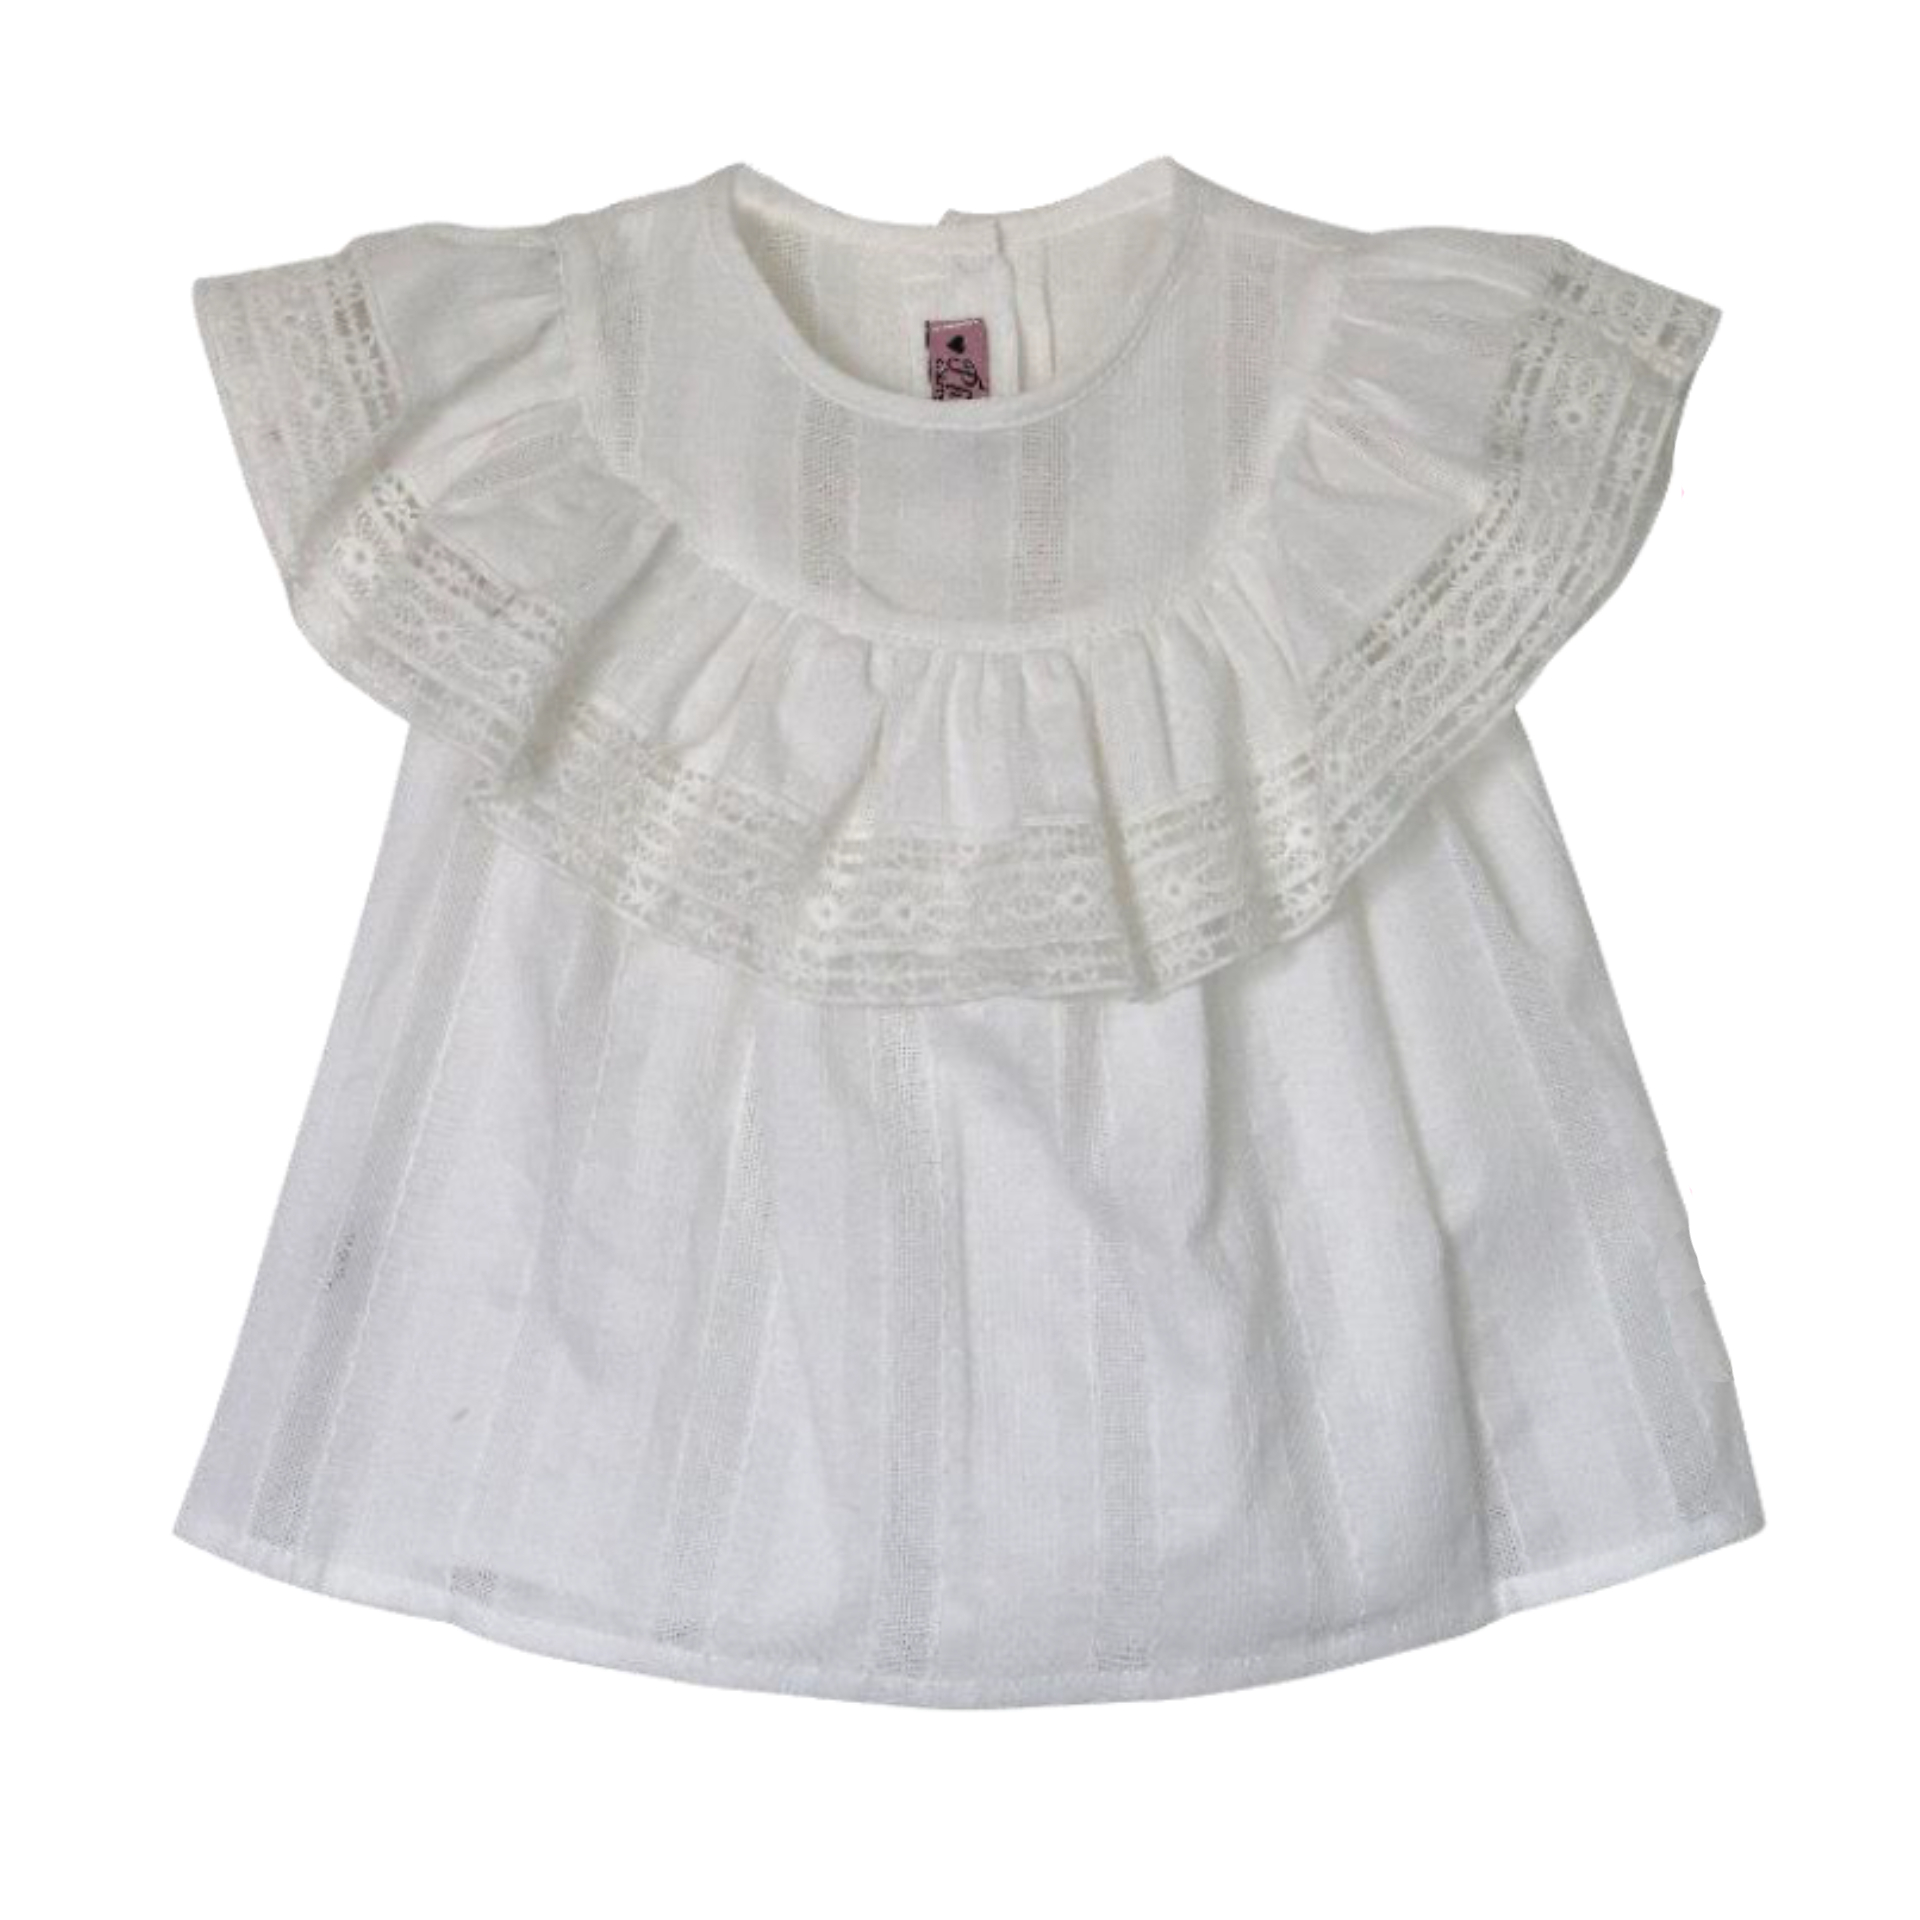 Embroidery  frill blouse with lace